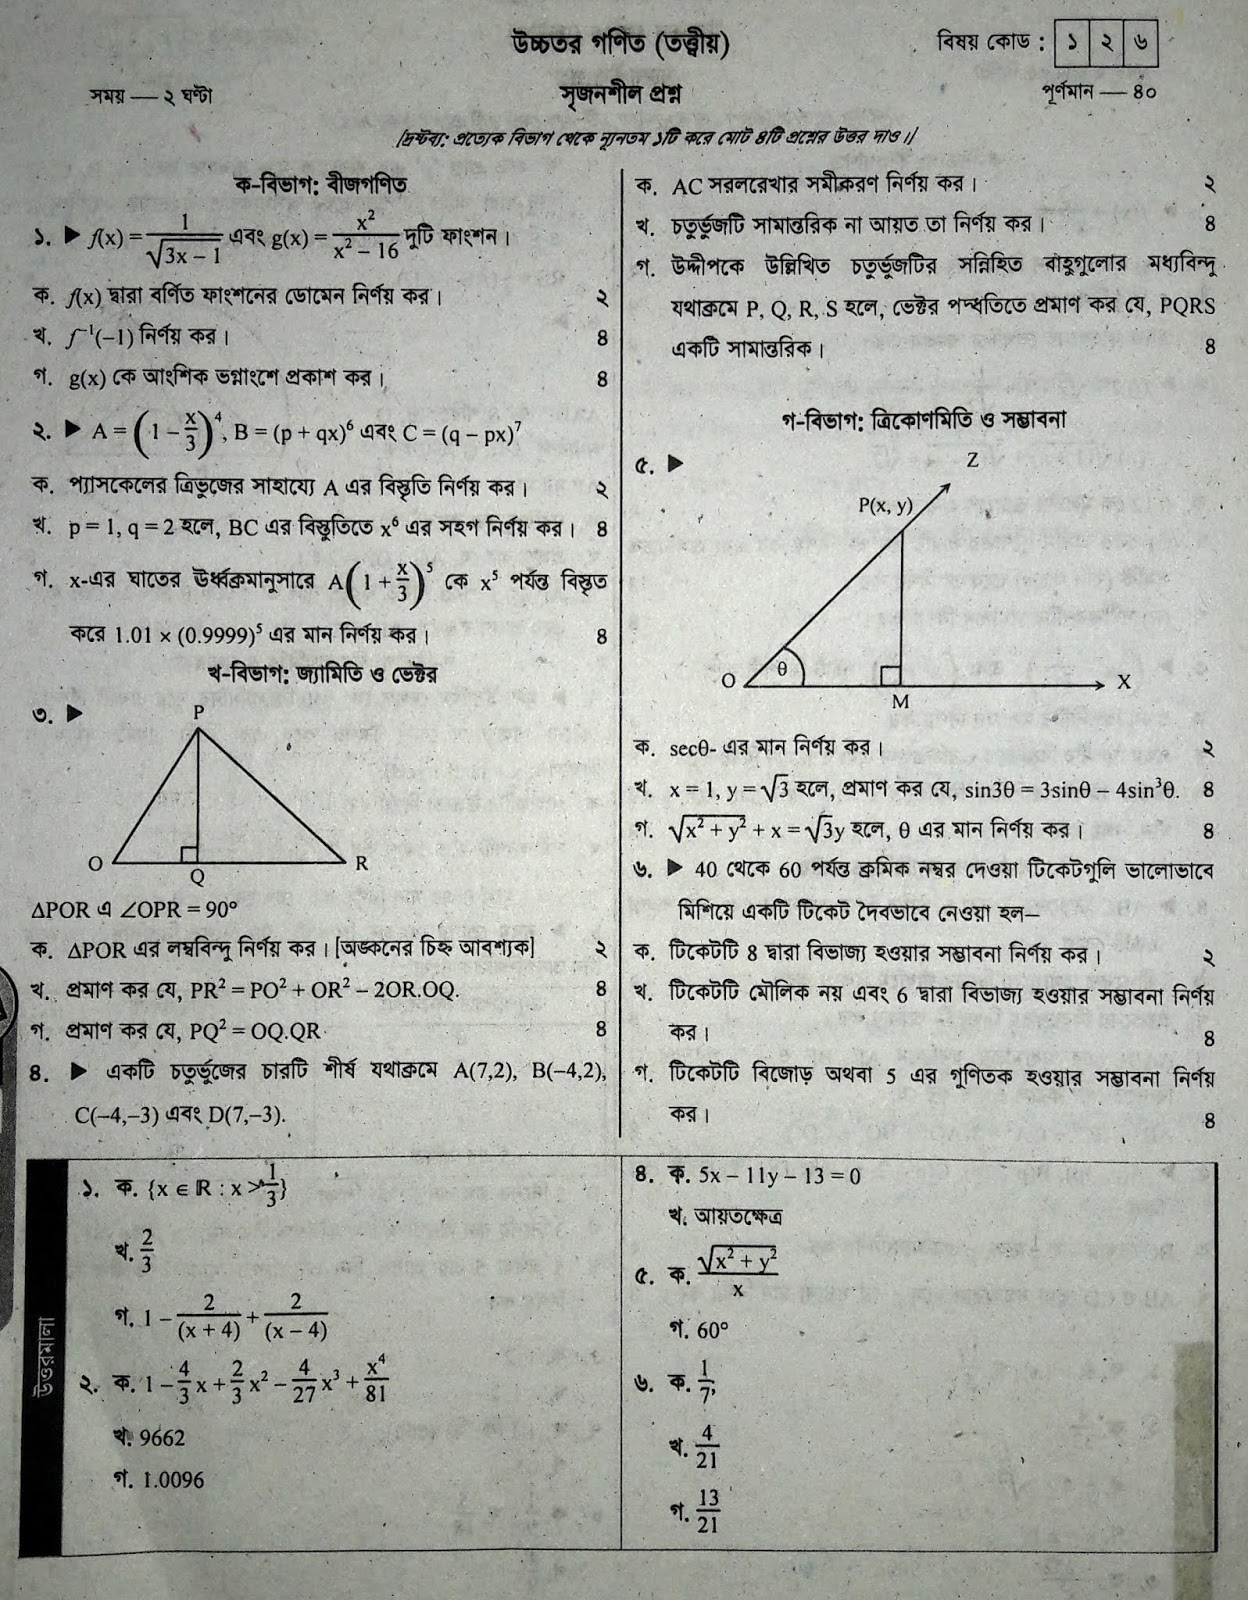 SSC Higher Math suggestion, question paper, model question, mcq question, question pattern, syllabus for dhaka board, all boards